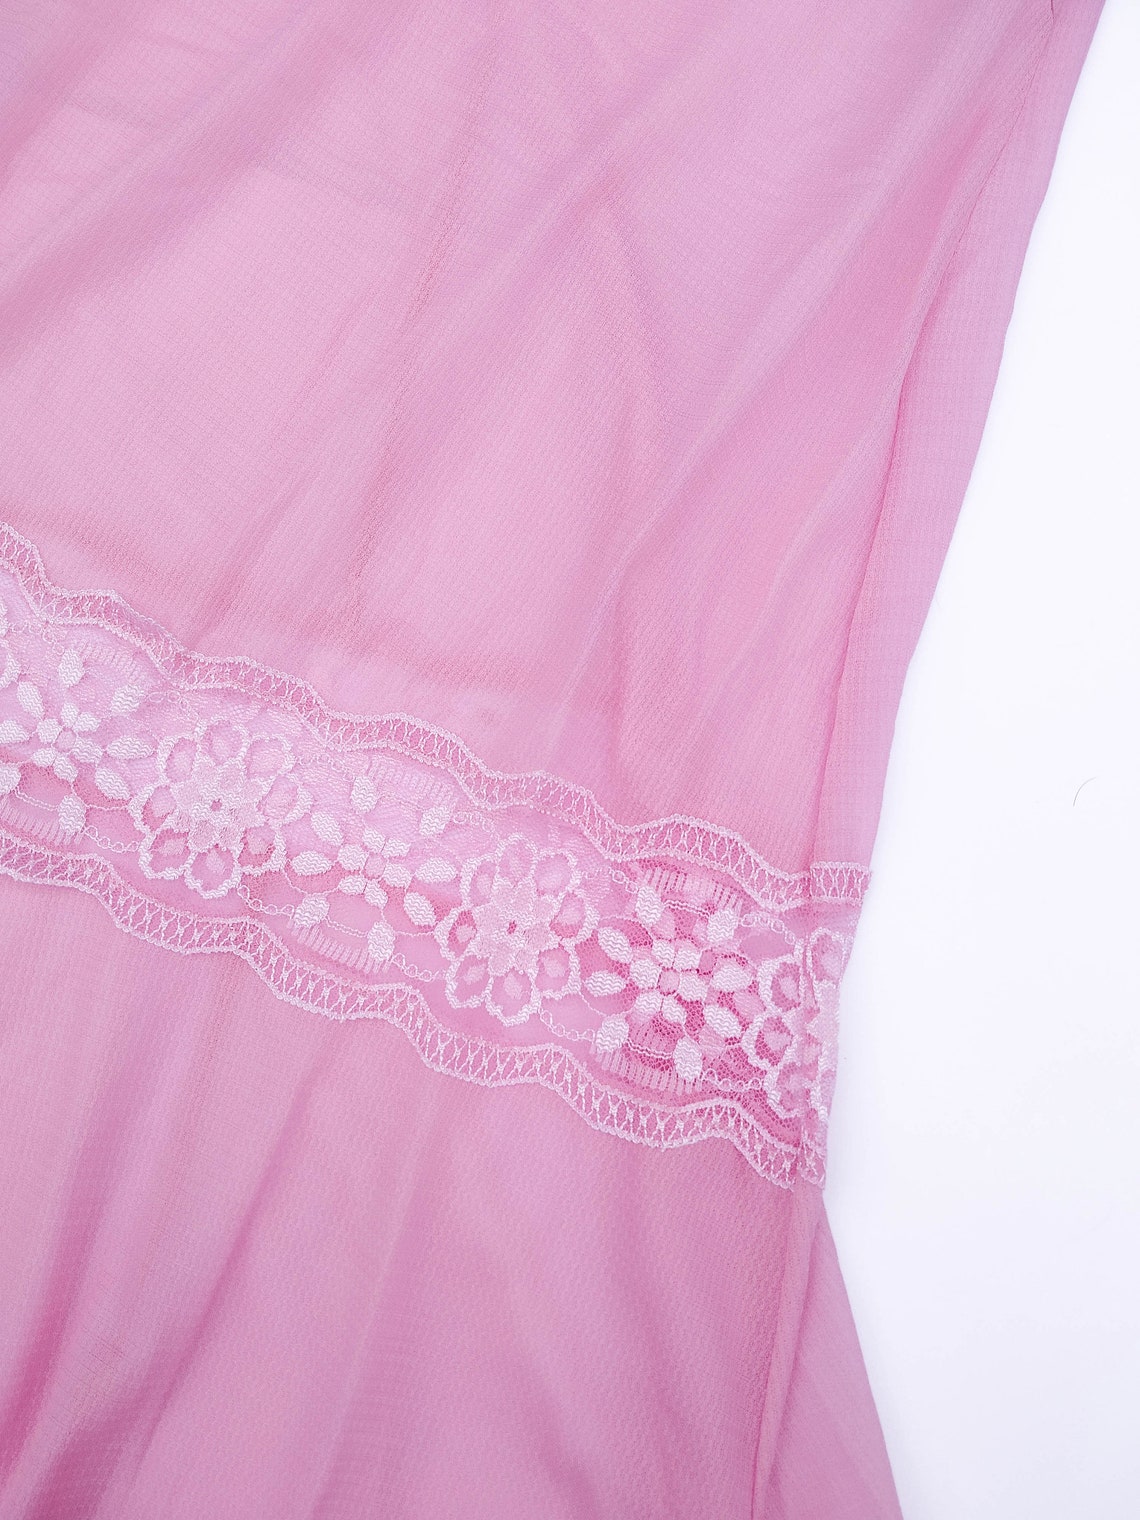 Vintage Baby Pink Lace Nightgown Fairycore Clothing Peignoir - Etsy